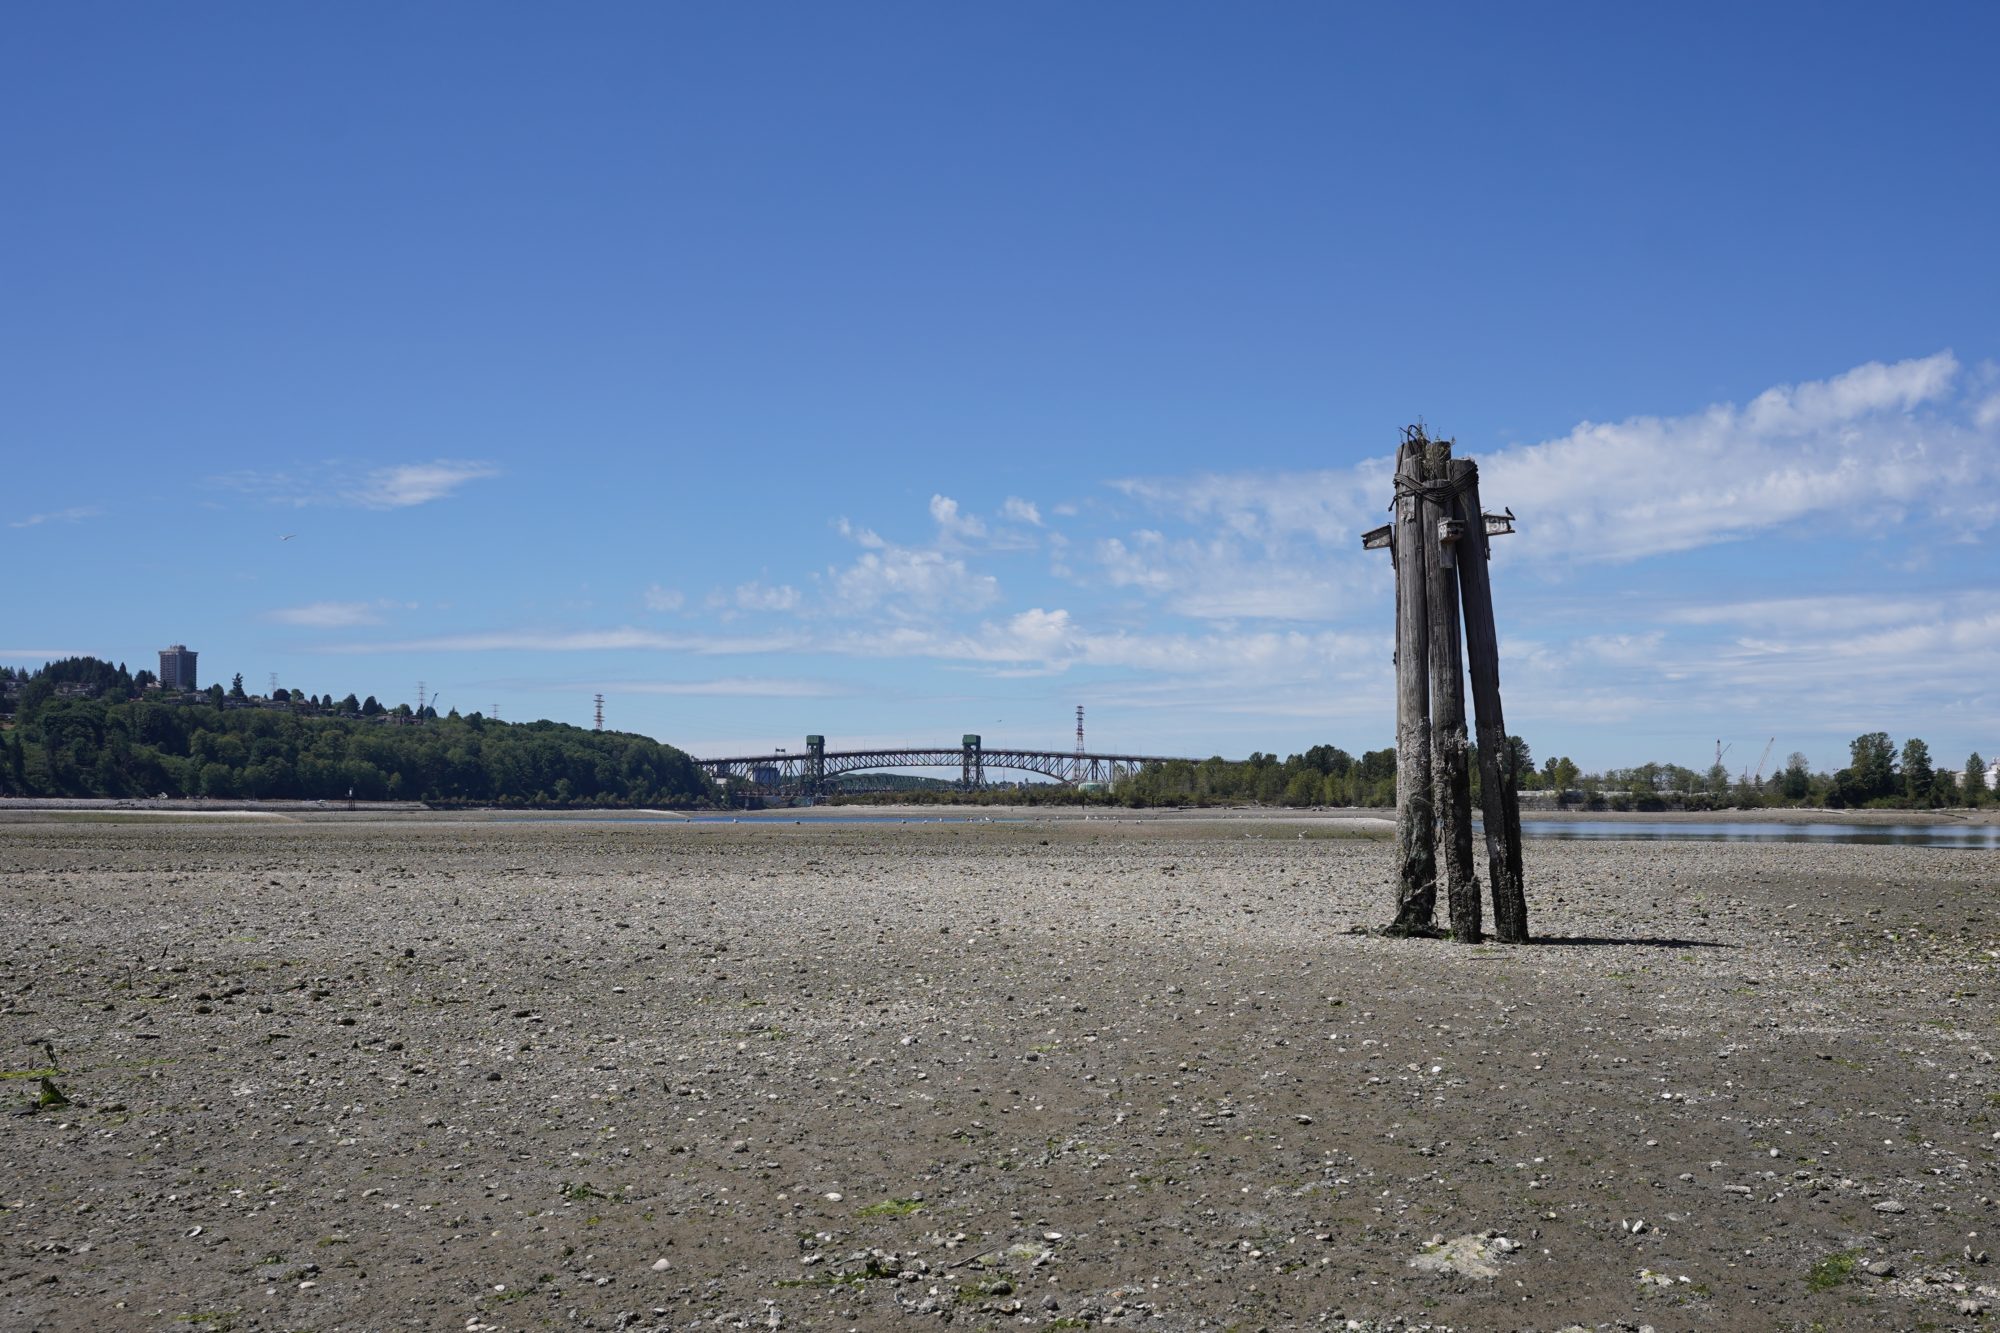 A view of Second Narrows Bridge in the distance, and a Purple Martin condo tower in the foreground. From this perspective it looks like the ground is totally dry